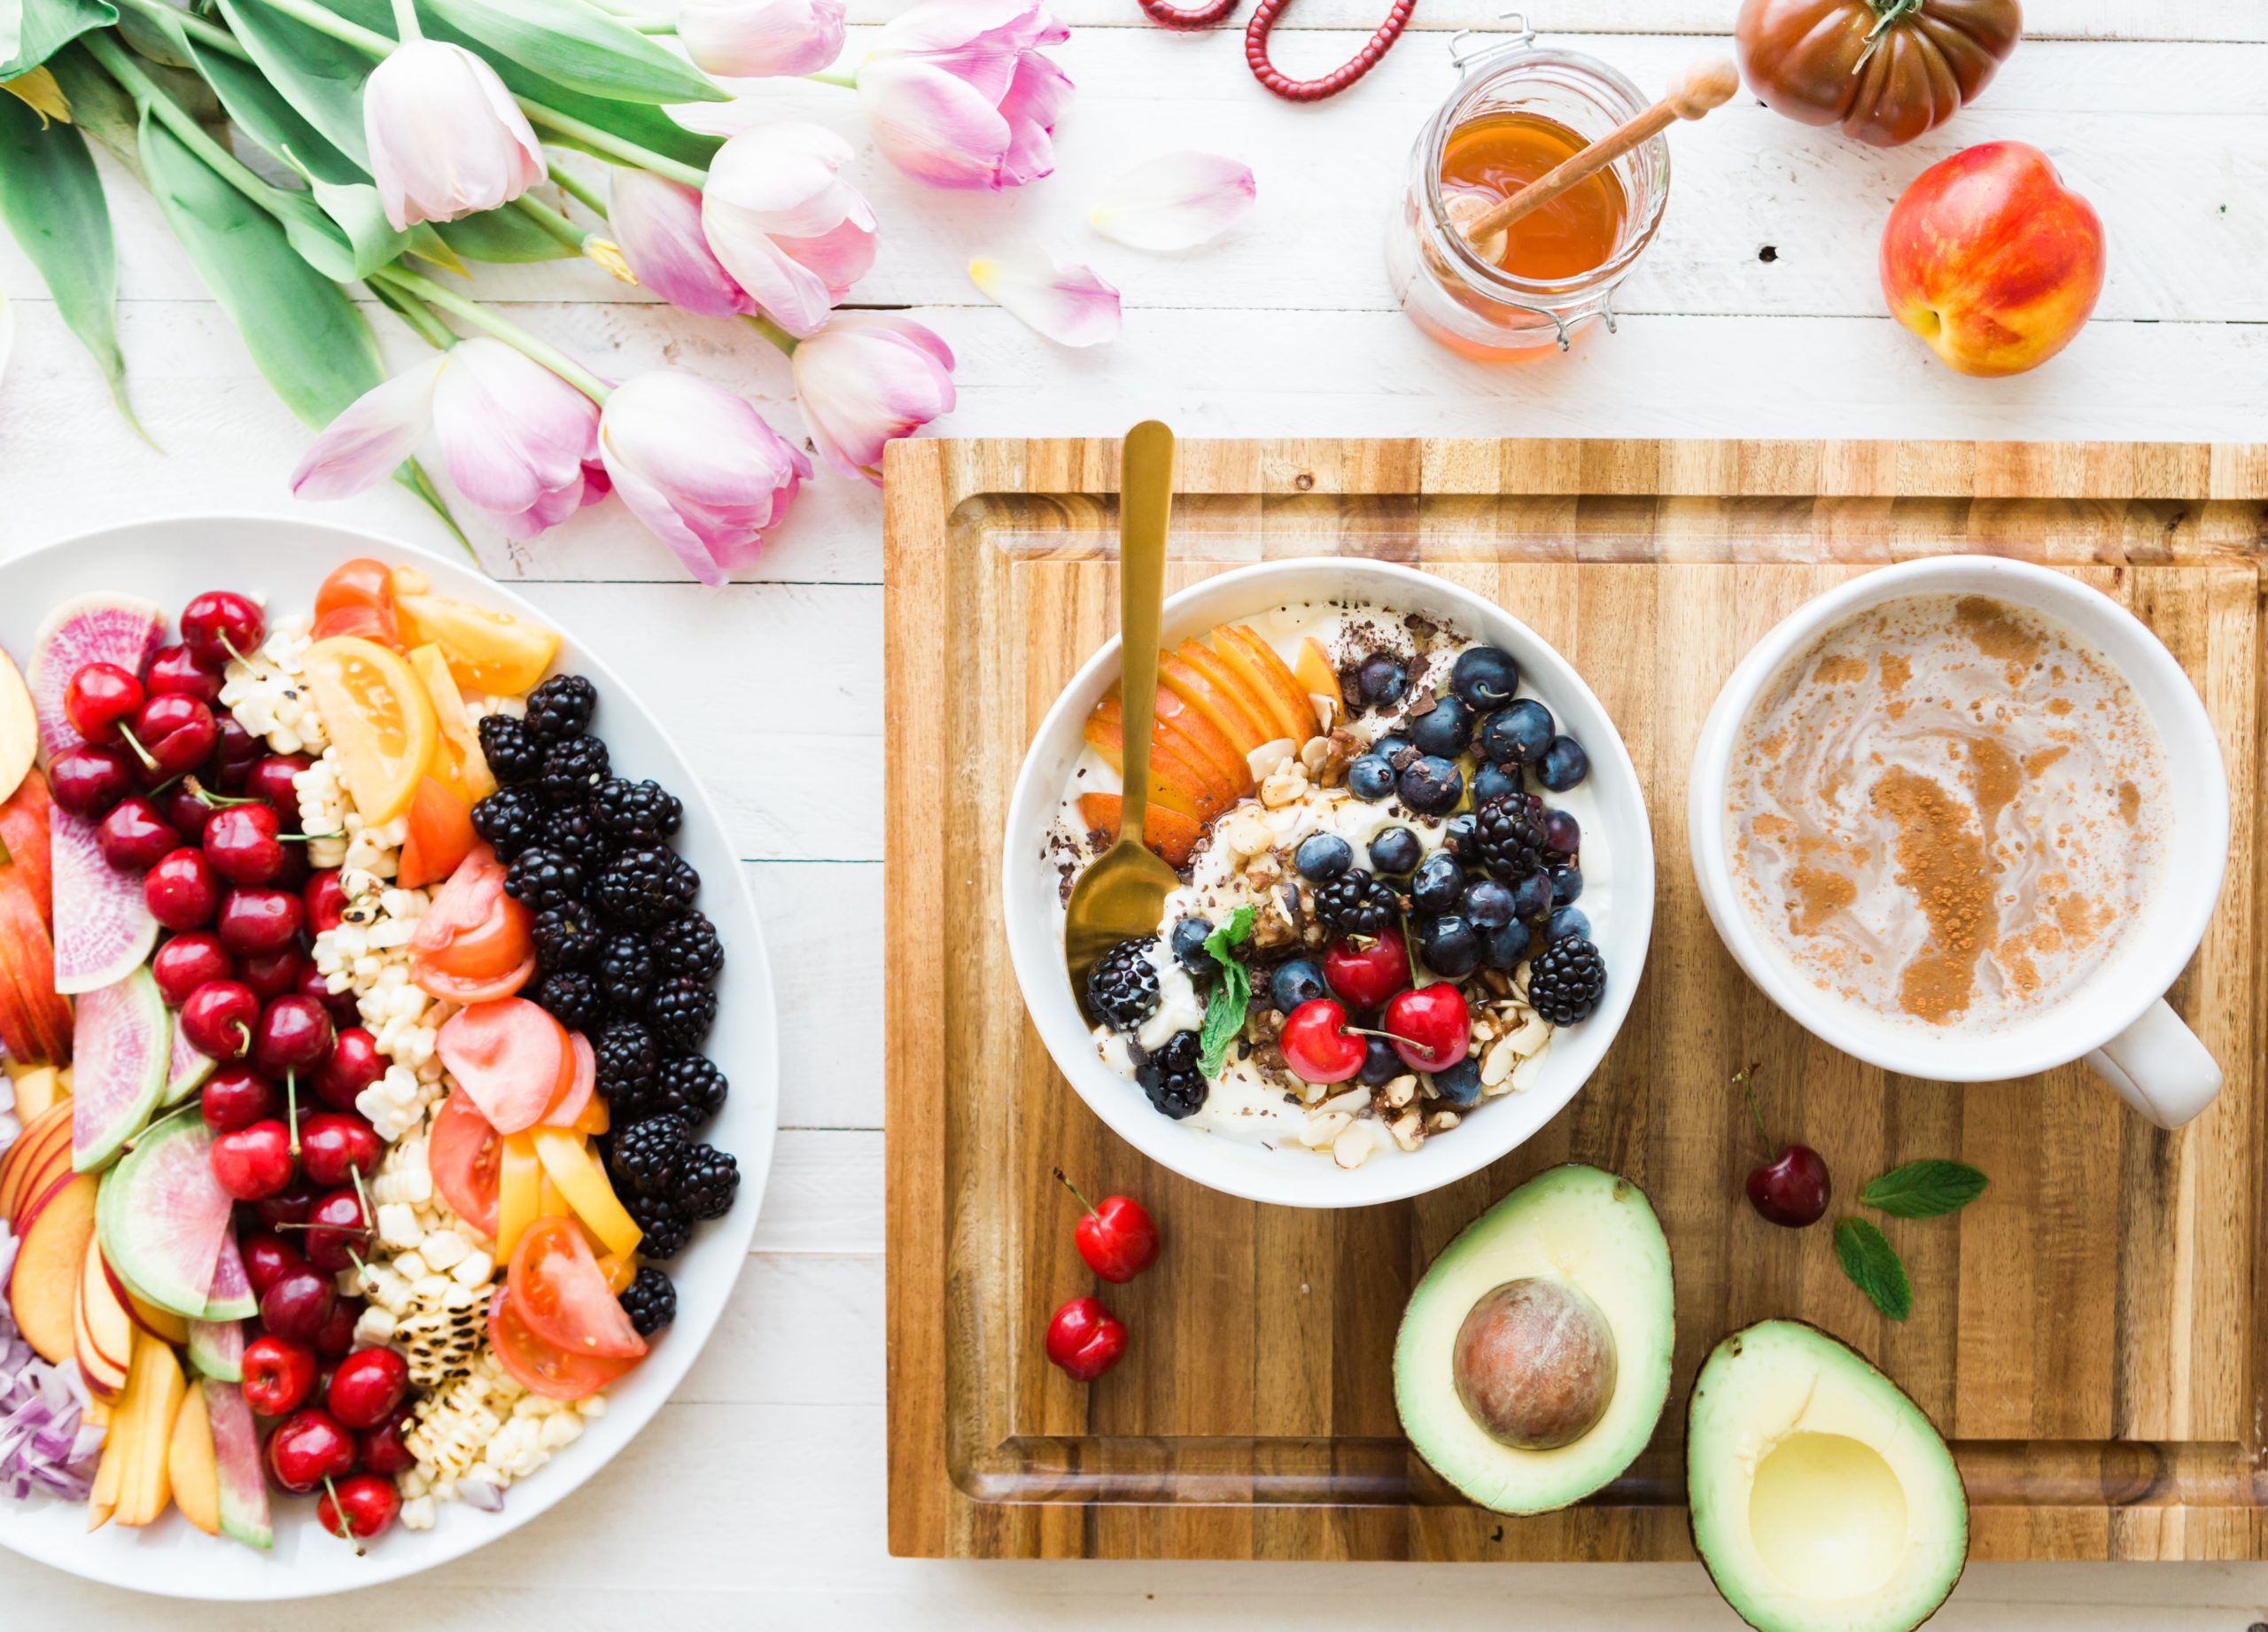 Image of a layout of fresh fruits, coffee, and flowers. Detoxification, nutrition, and movement are some of the ways our functional medicine doctor treats the cause of chronic disease. Start restoring your health and feeling better with functional medicine in Orland Park, IL 60487. Call today.